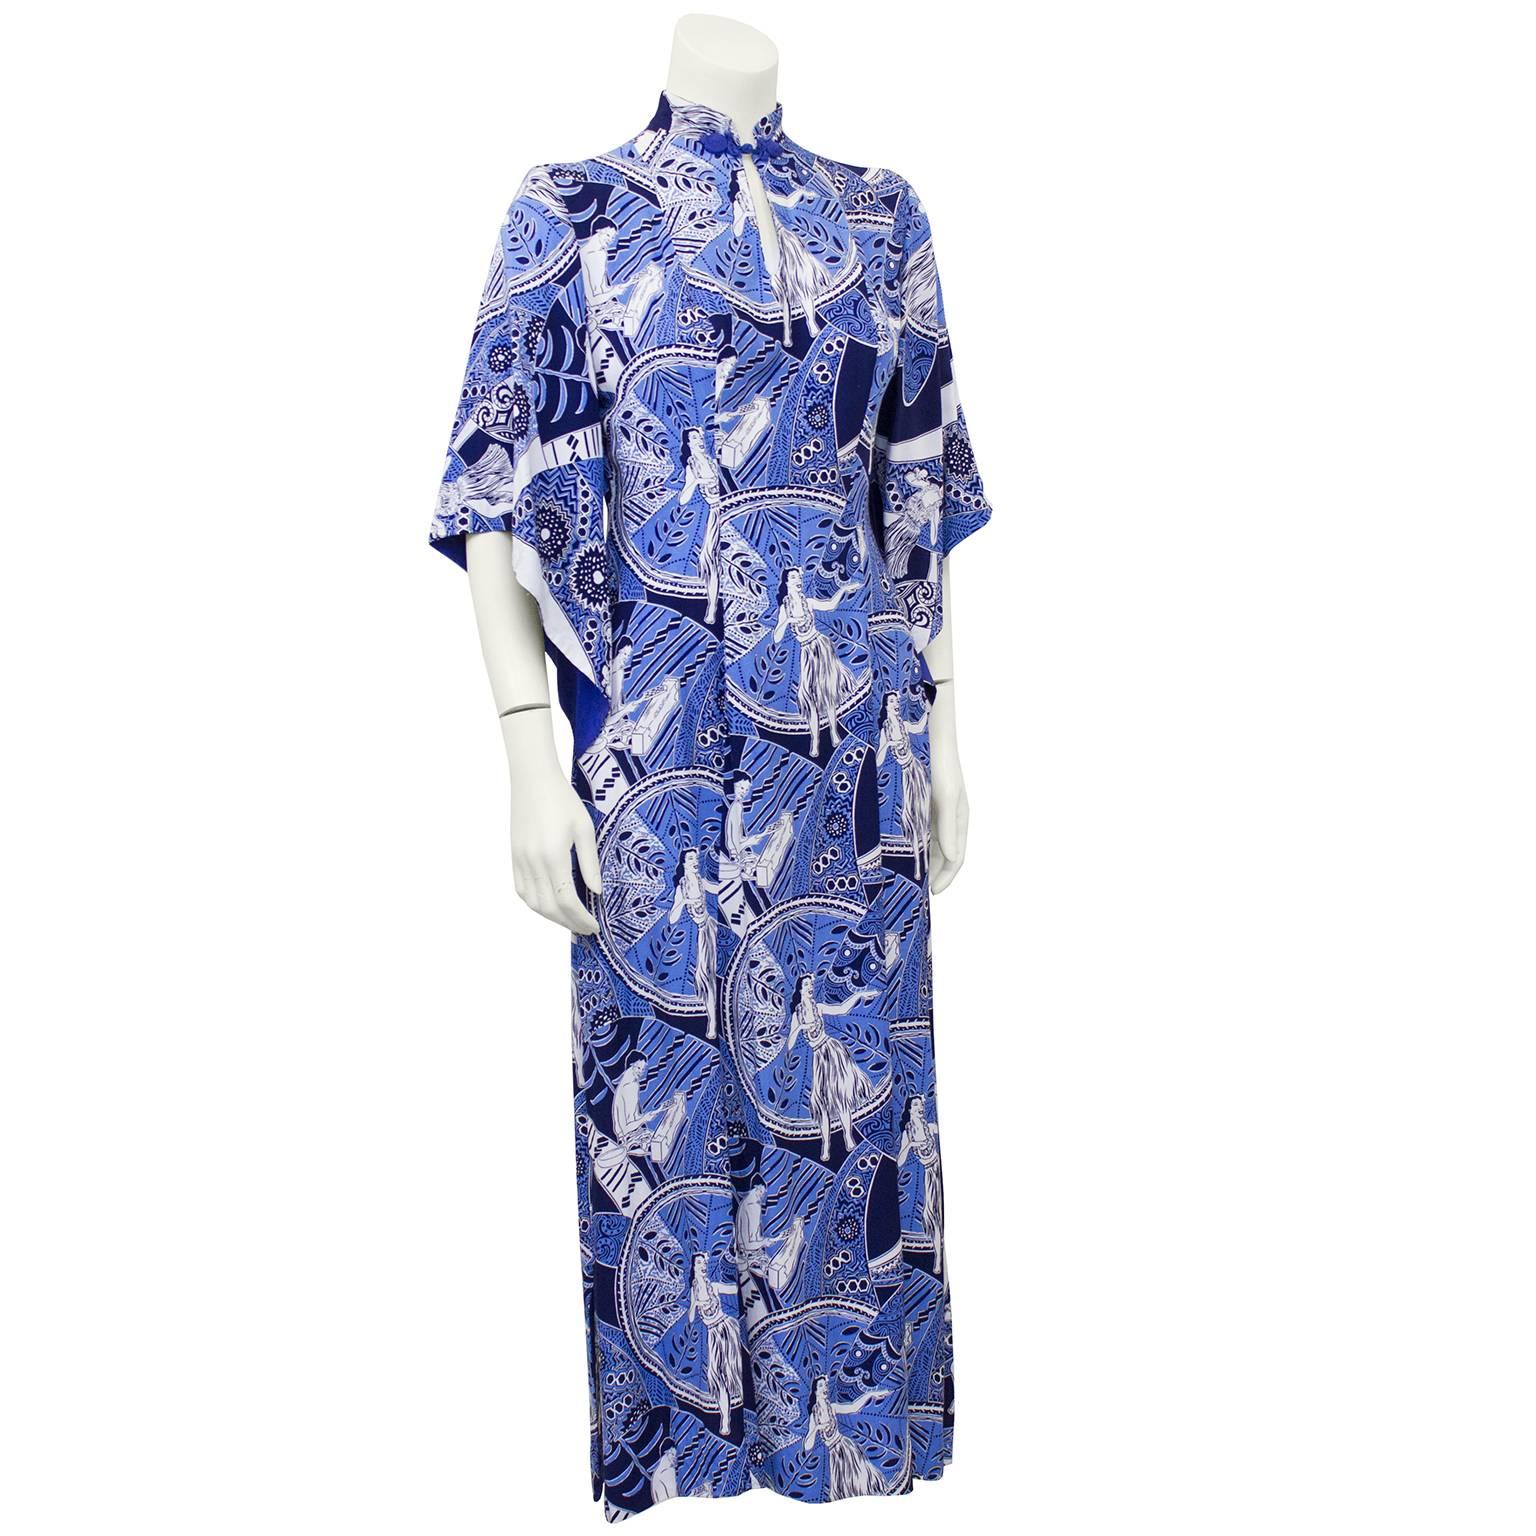 Bold periwinkle blue, black and white rayon 1940's hostess gown printed with Hawaiian ethnographic motifs. Mandarin collar with interesting Asian influenced knotted closure and keyhole, open trumpet shaped flowing asymmetrical sleeves. Very unique